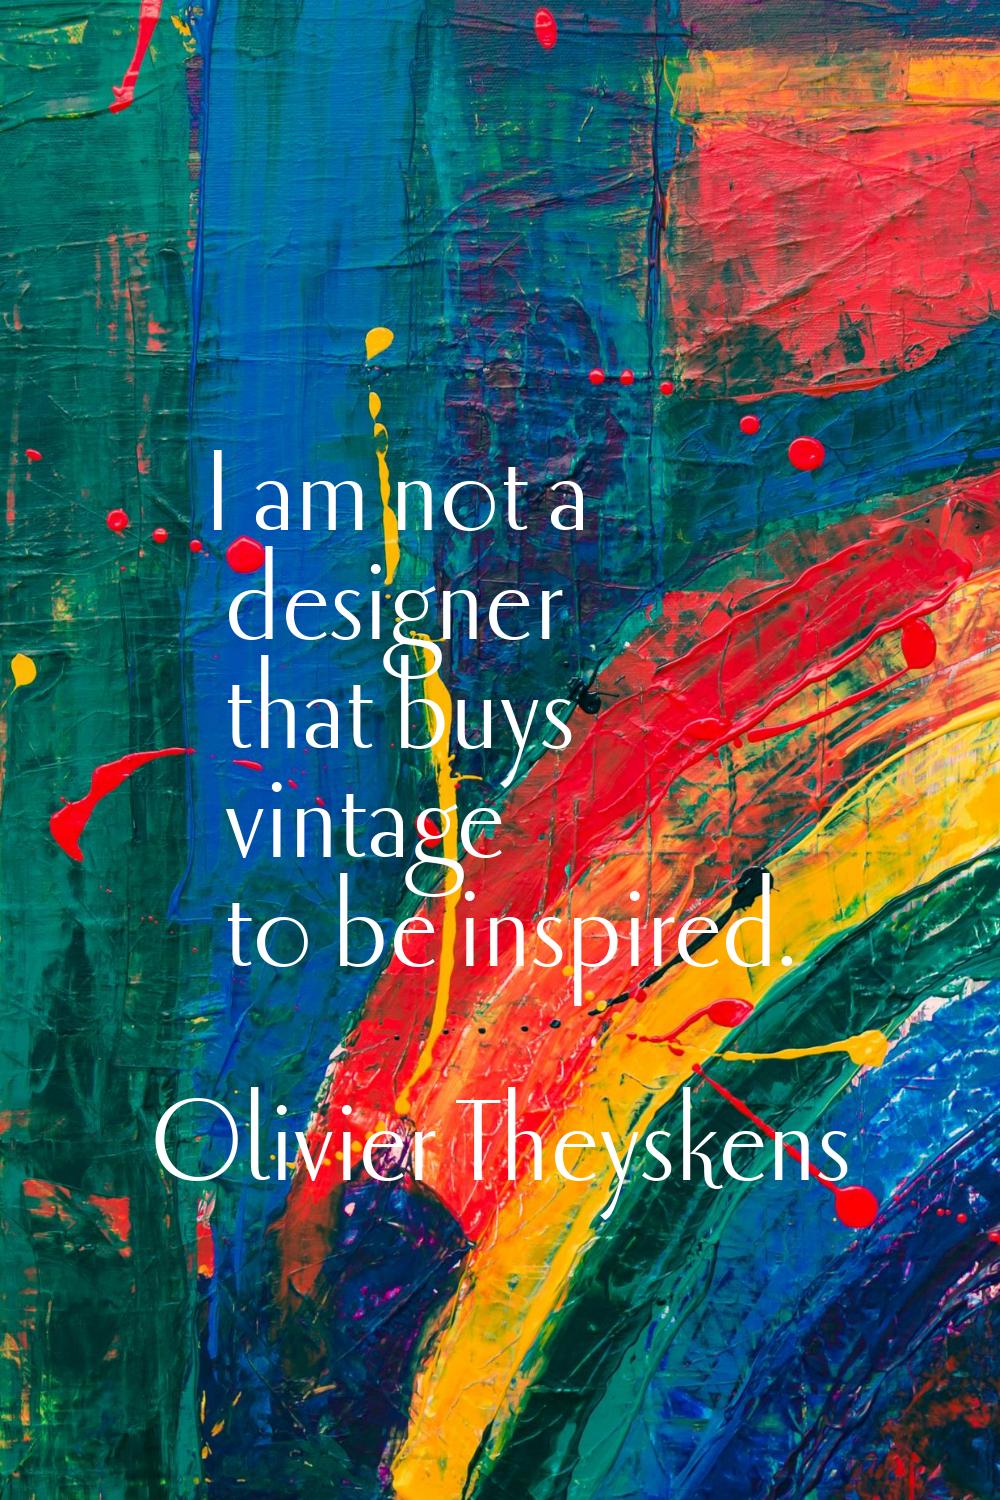 I am not a designer that buys vintage to be inspired.